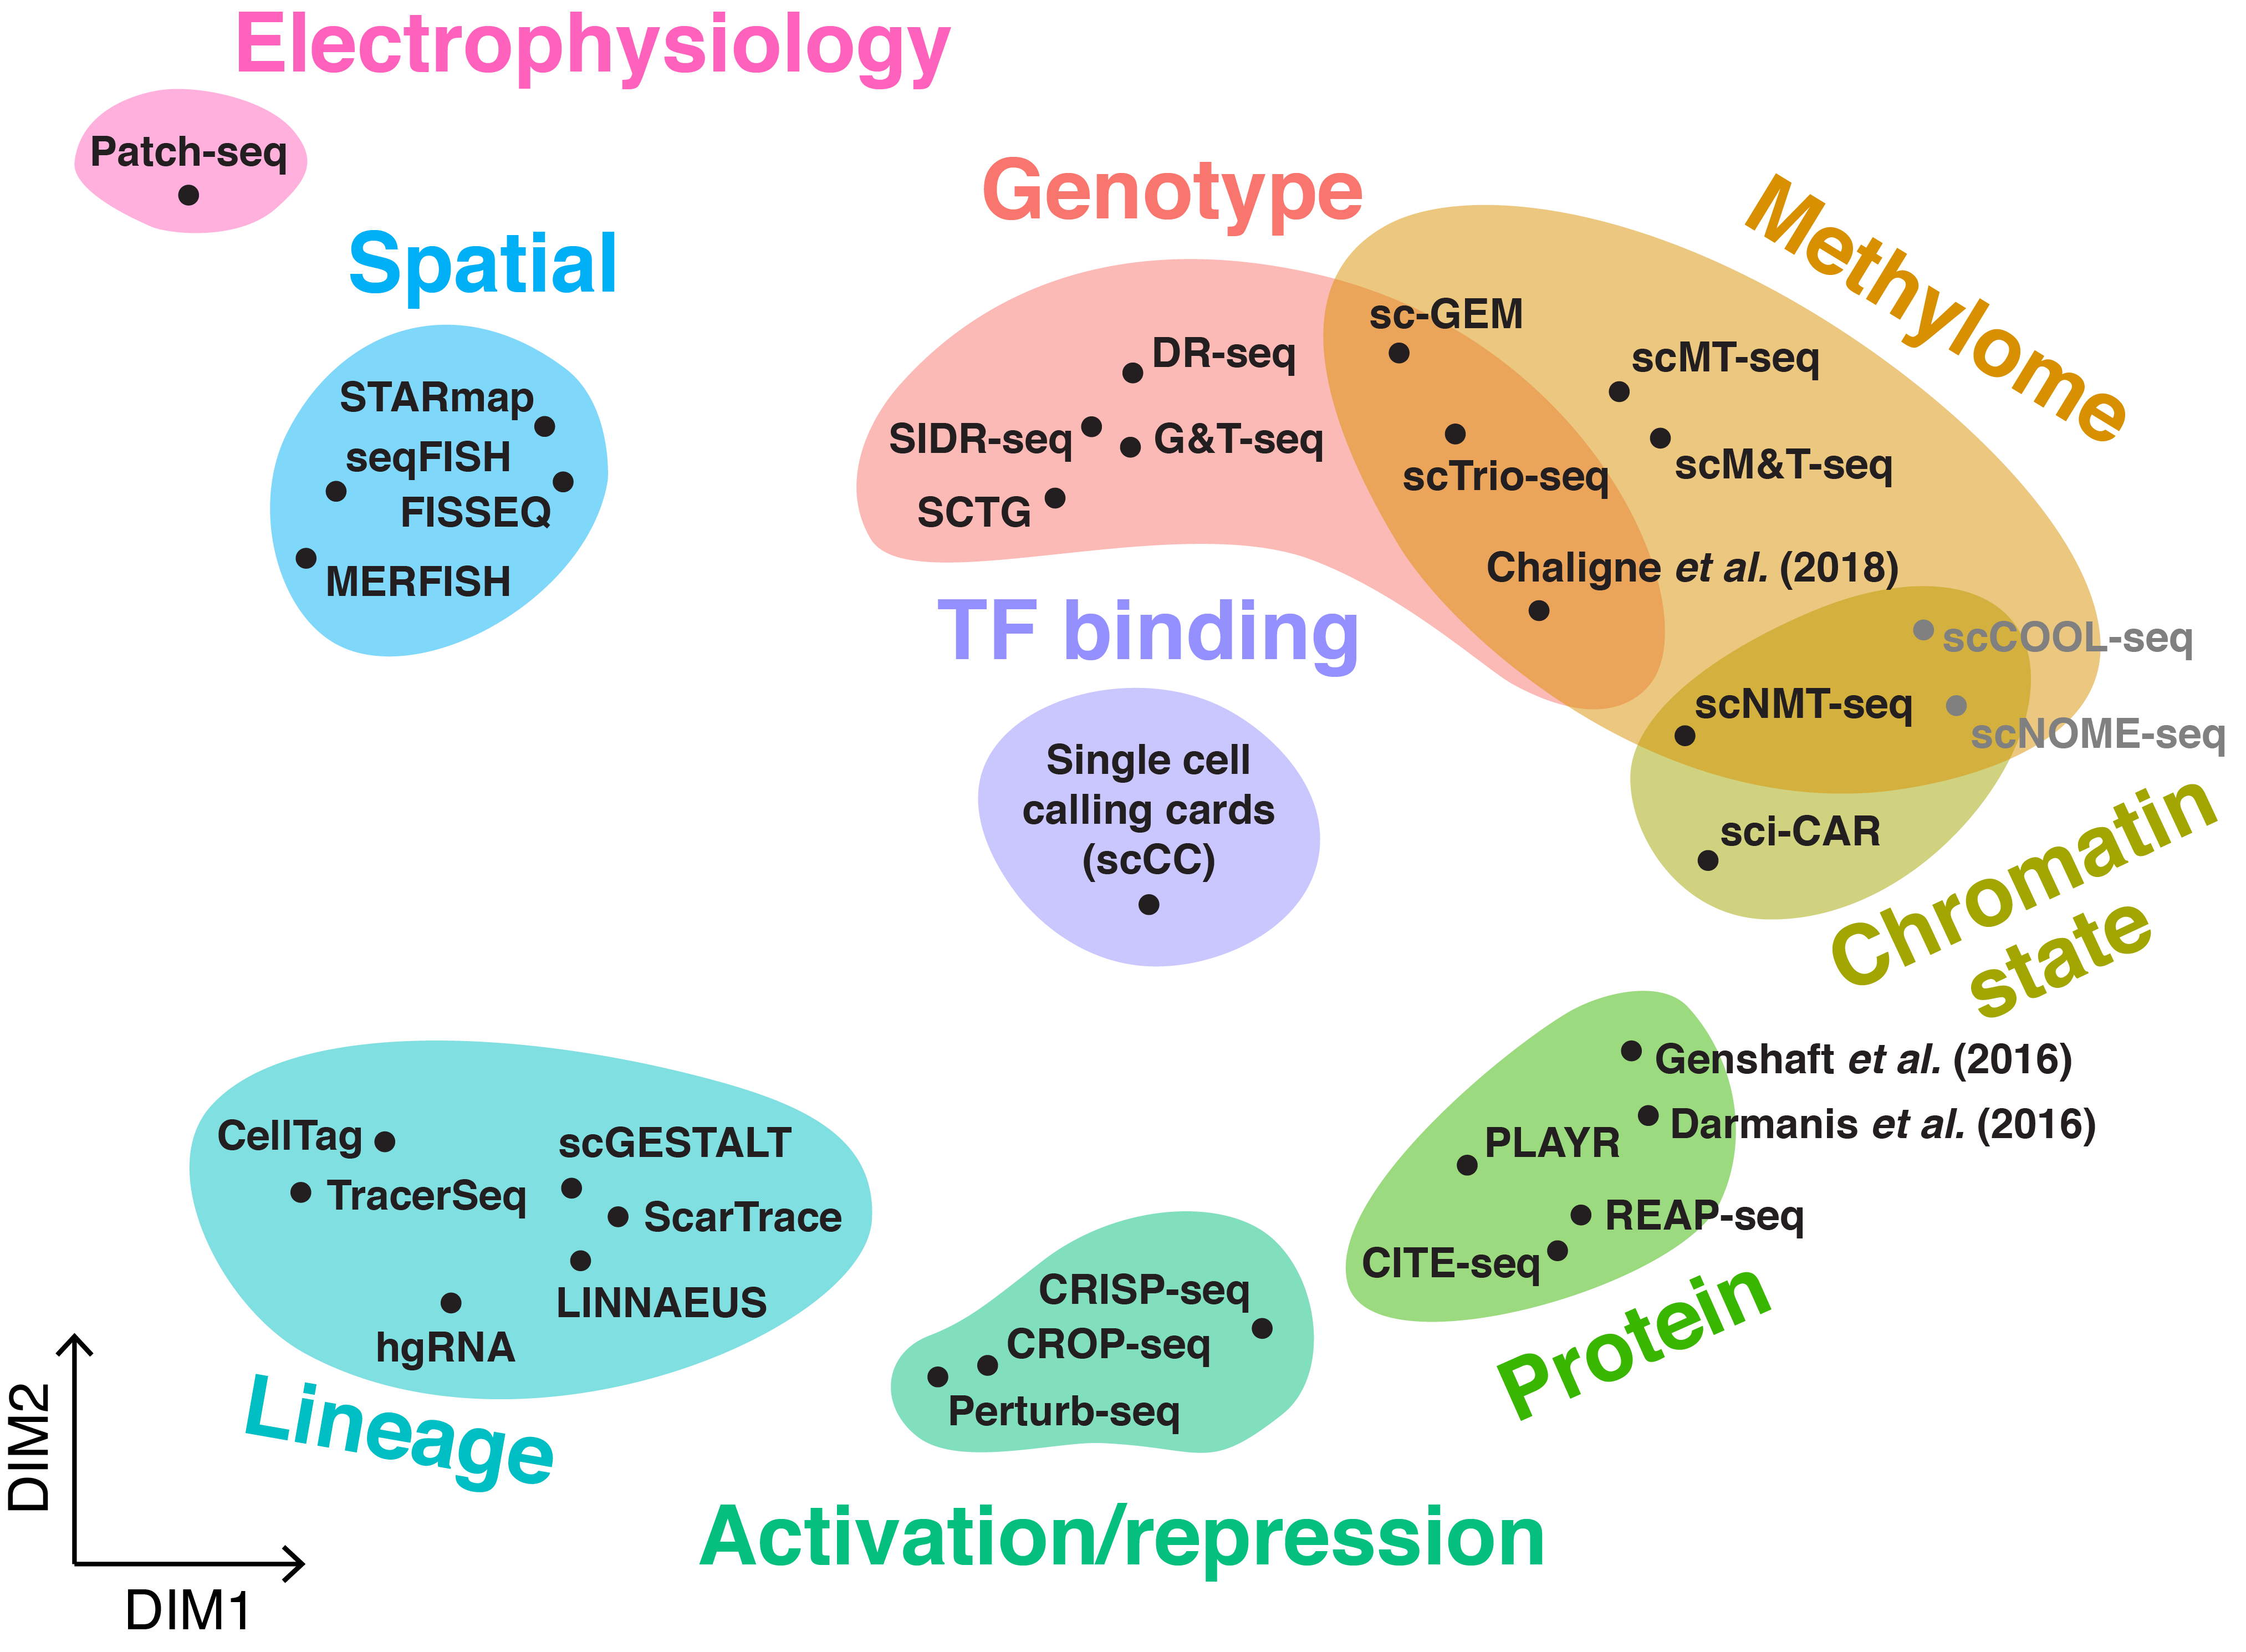 The range of multimodal scRNA-seq technologies. Many protocols have been developed to enable multiple measurements from the same individual cells with a selection shown here. These other measurements (shaded colours) include genotype (rose bud), methylation (cornsilk), chromatin state (muted lime), transcription factor binding (periwinkle), protein expression (jade lime), activation or repression (cabbage), lineage tracing (aquamarine blue), spatial location (light sky blue) or electrophysiology (cotton candy). Image from https://github.com/arnavm/multimodal-scRNA-seq available under a Creative Commons Attribution-NonCommercial-ShareAlike 4.0 International (CC BY-NC-SA 4.0) license [46].